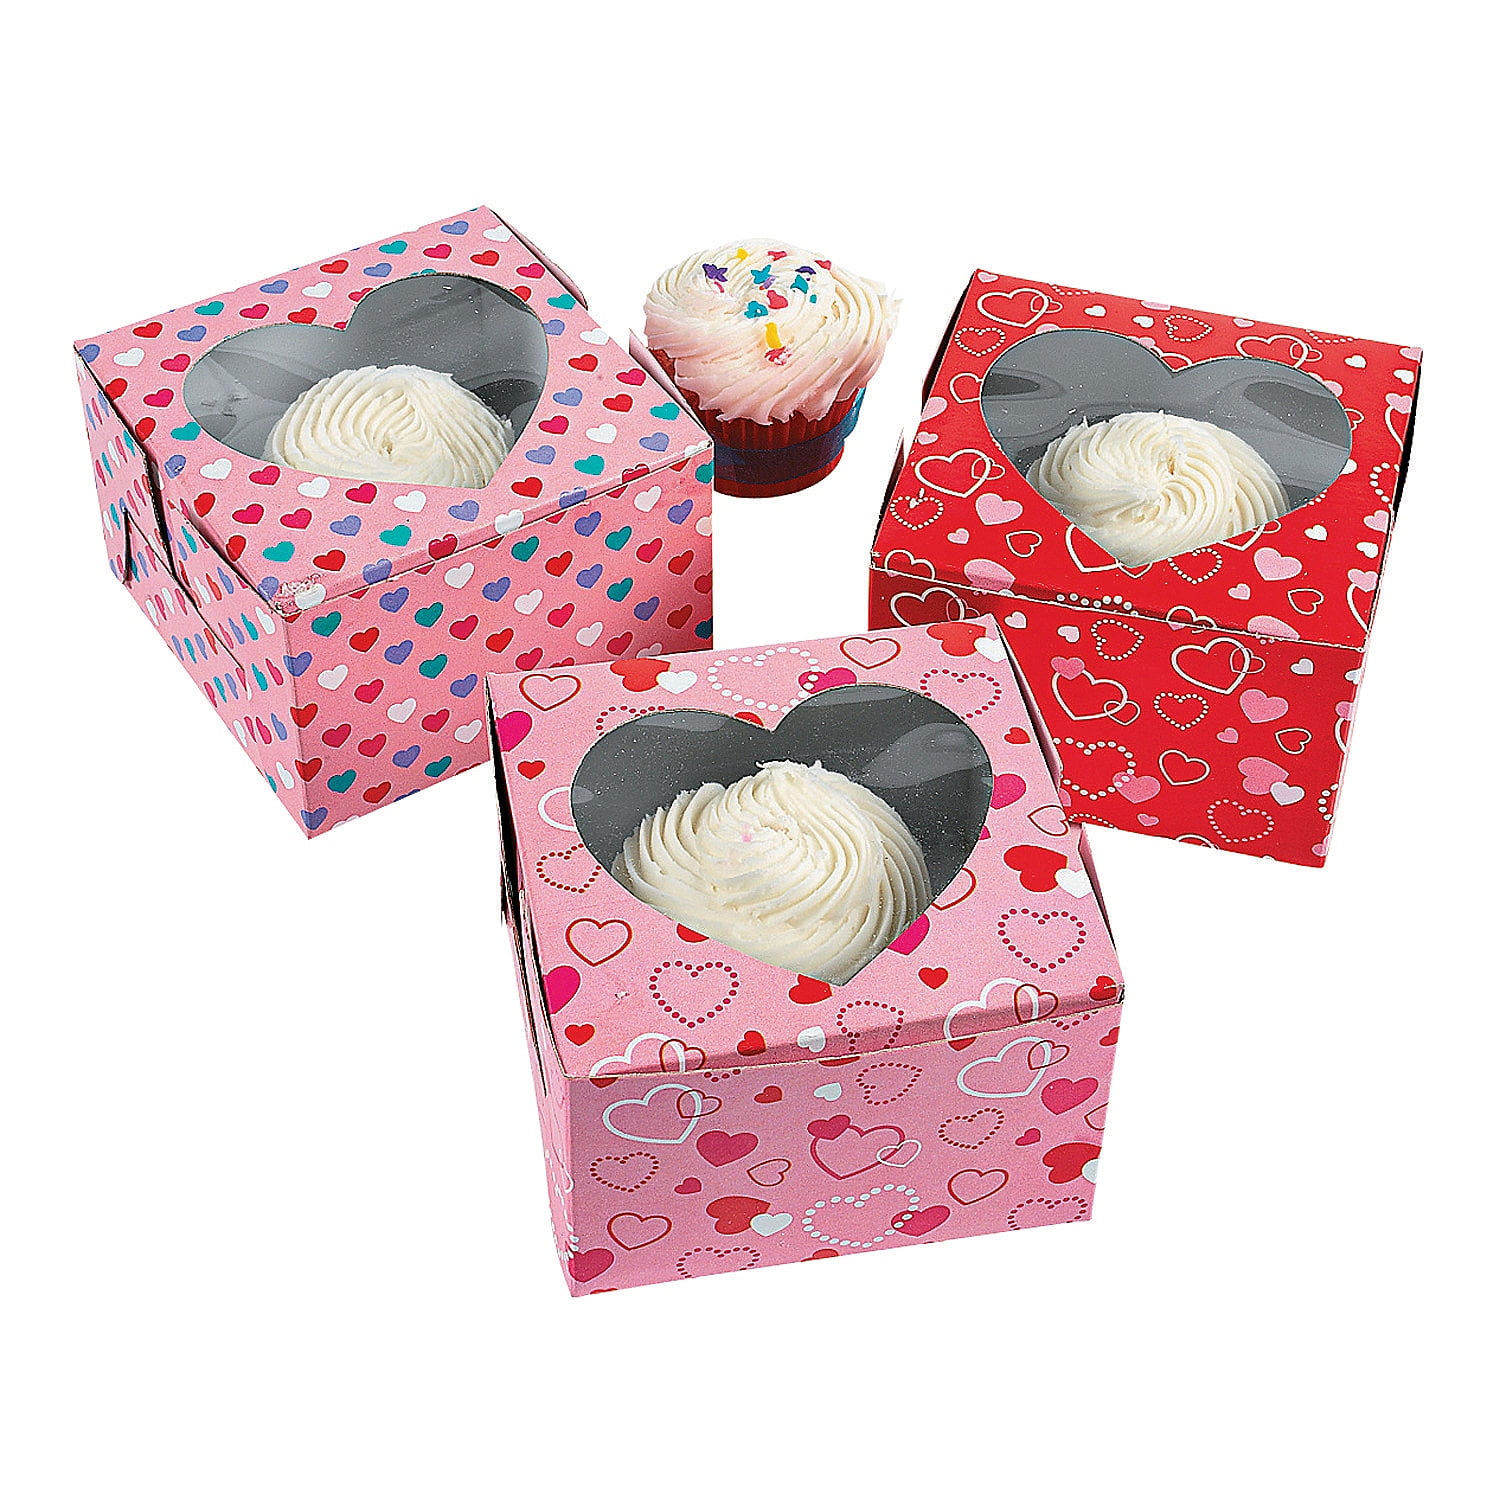 Gift Packaging Box Heart Shaped Box With Transparent Window For Wedding  Birthday Party Valentine Decorative Packaging Flowers Gifts Boxes From  Topwholesalerno4, $15.42